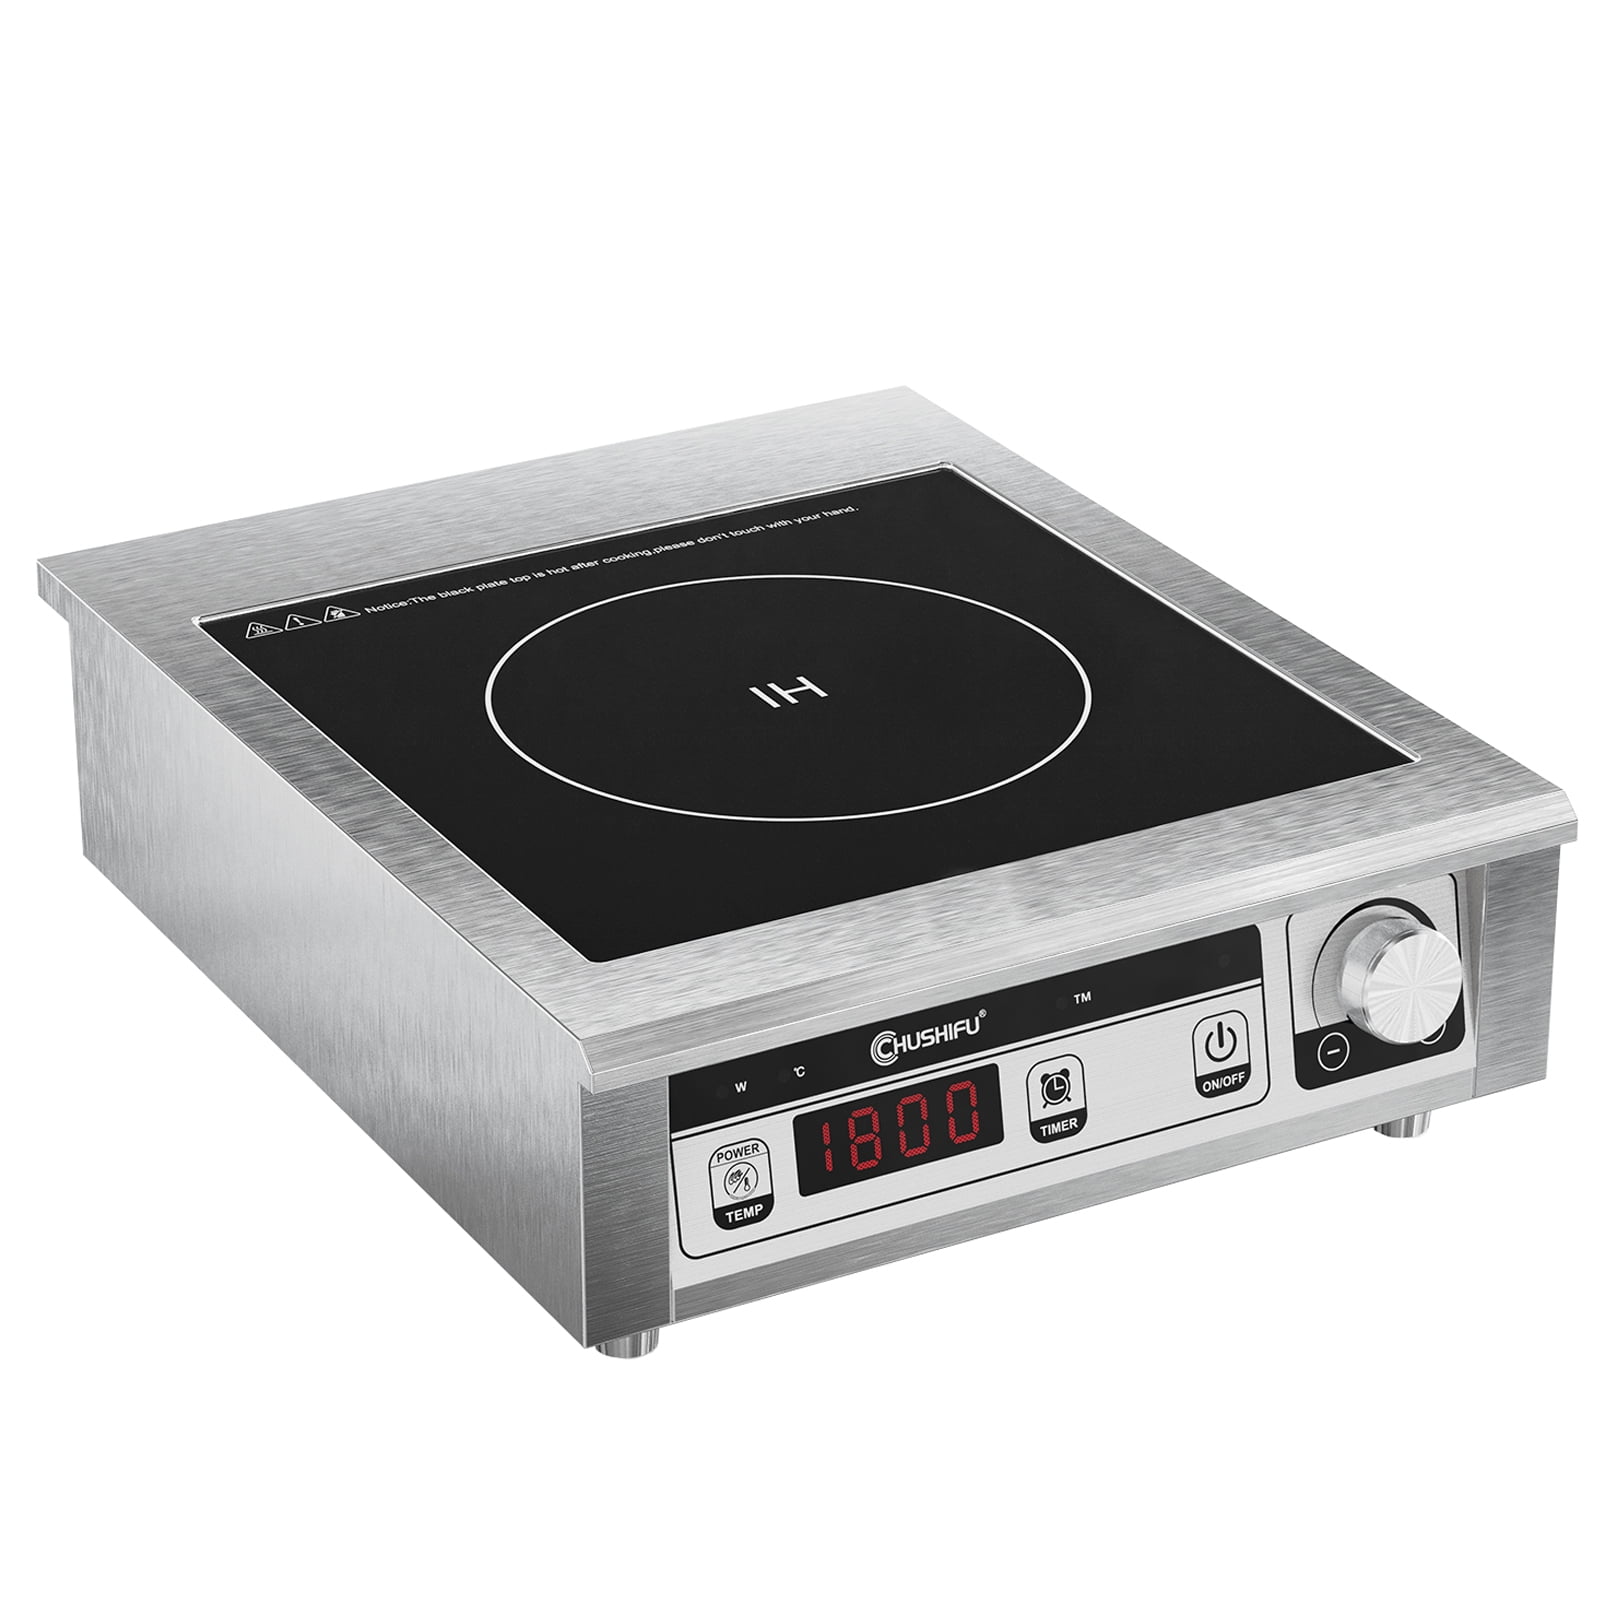 Portable Induction Cooktop, POTFYA Professional Countertop Single Burner Induction Hot Plate with LCD Sensor Touch, Powerful 1800W, 3-Hour Timer